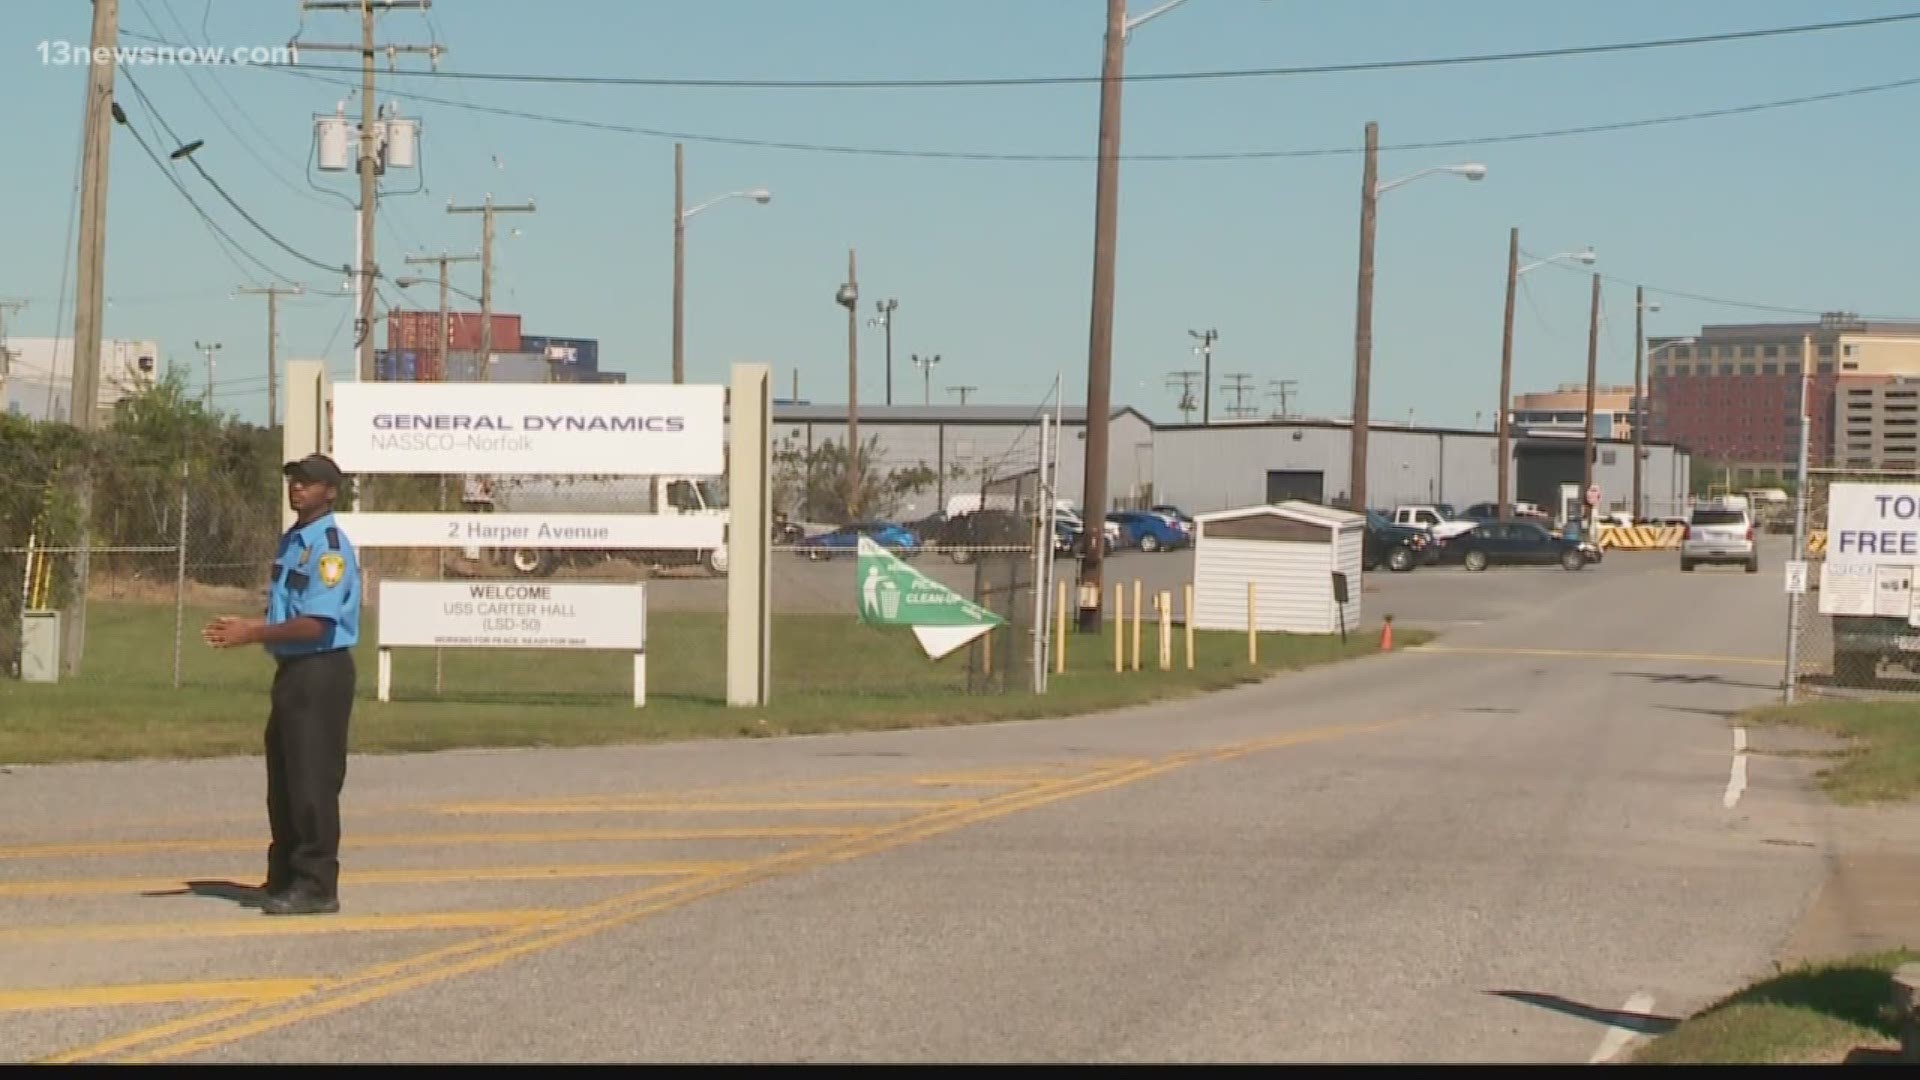 Right now, we're being told there has been no evidence of an active shooter at Nassco Shipyard in Portsmouth.